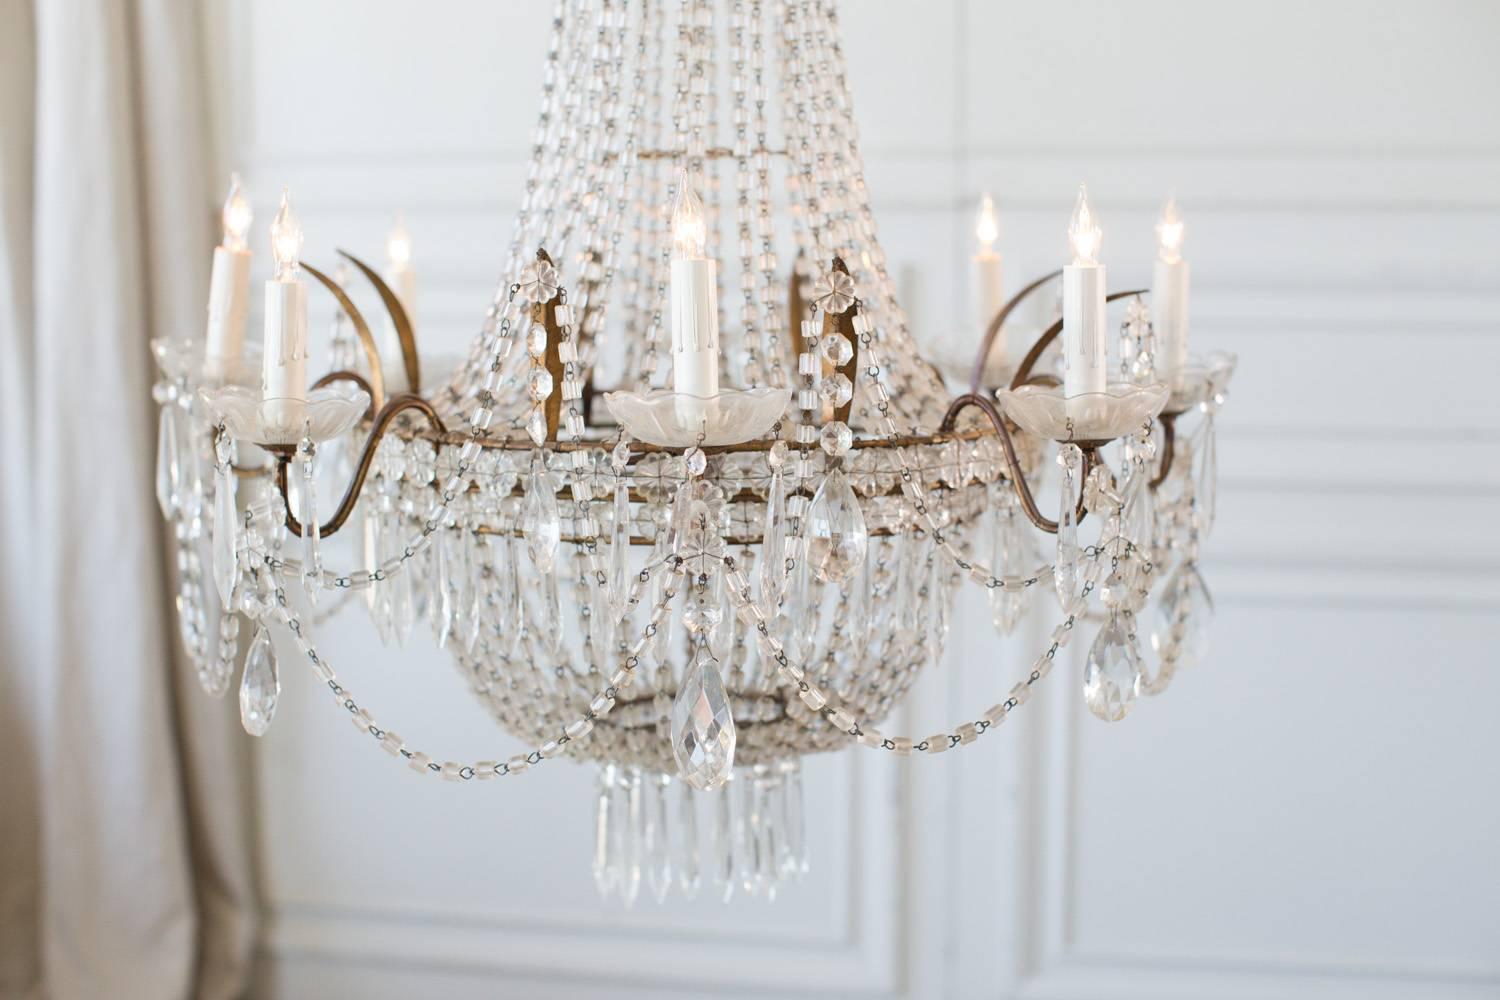 Gorgeous antique basket style chandelier with eight arms. A Cascade of glass beads gives this beautiful light shape and adds to the splendid presentation. Heavy faceted crystals are delicately mixed in lending perfection to this jewel. Hang above a